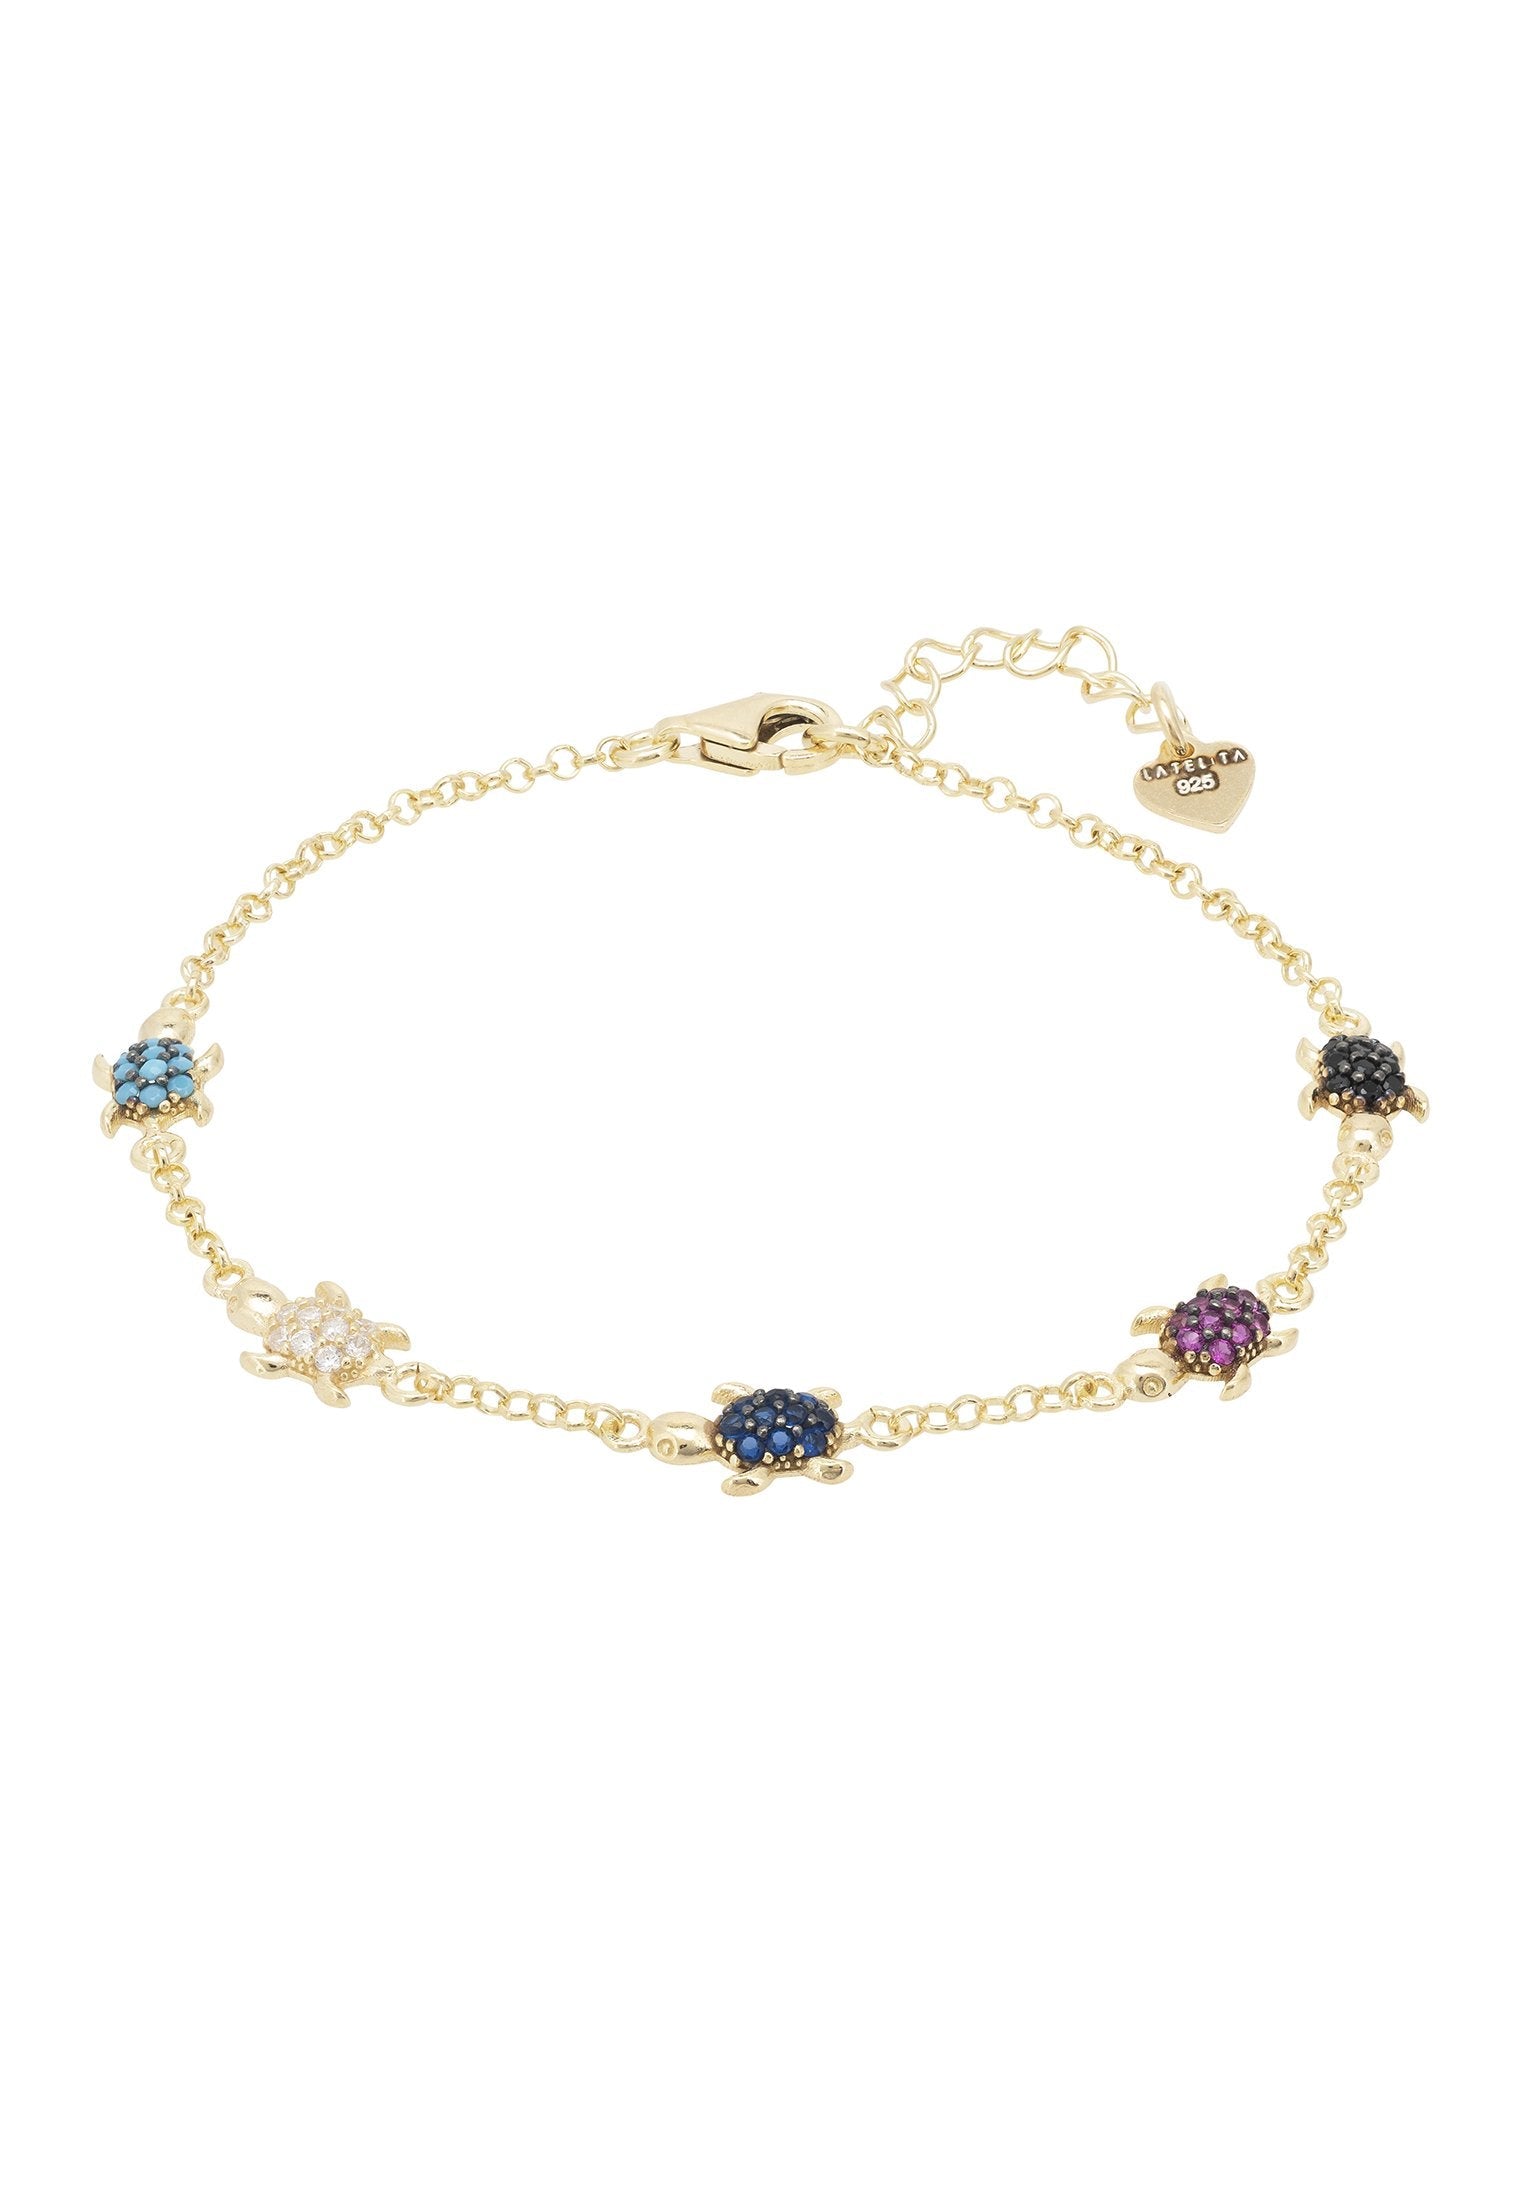 Colorful Turtle Bracelet with Zirconia Stones - Symbol of Good Fortune and Longevity, Sterling Silver and Gold Plated Jewelry for Women Bijou Her